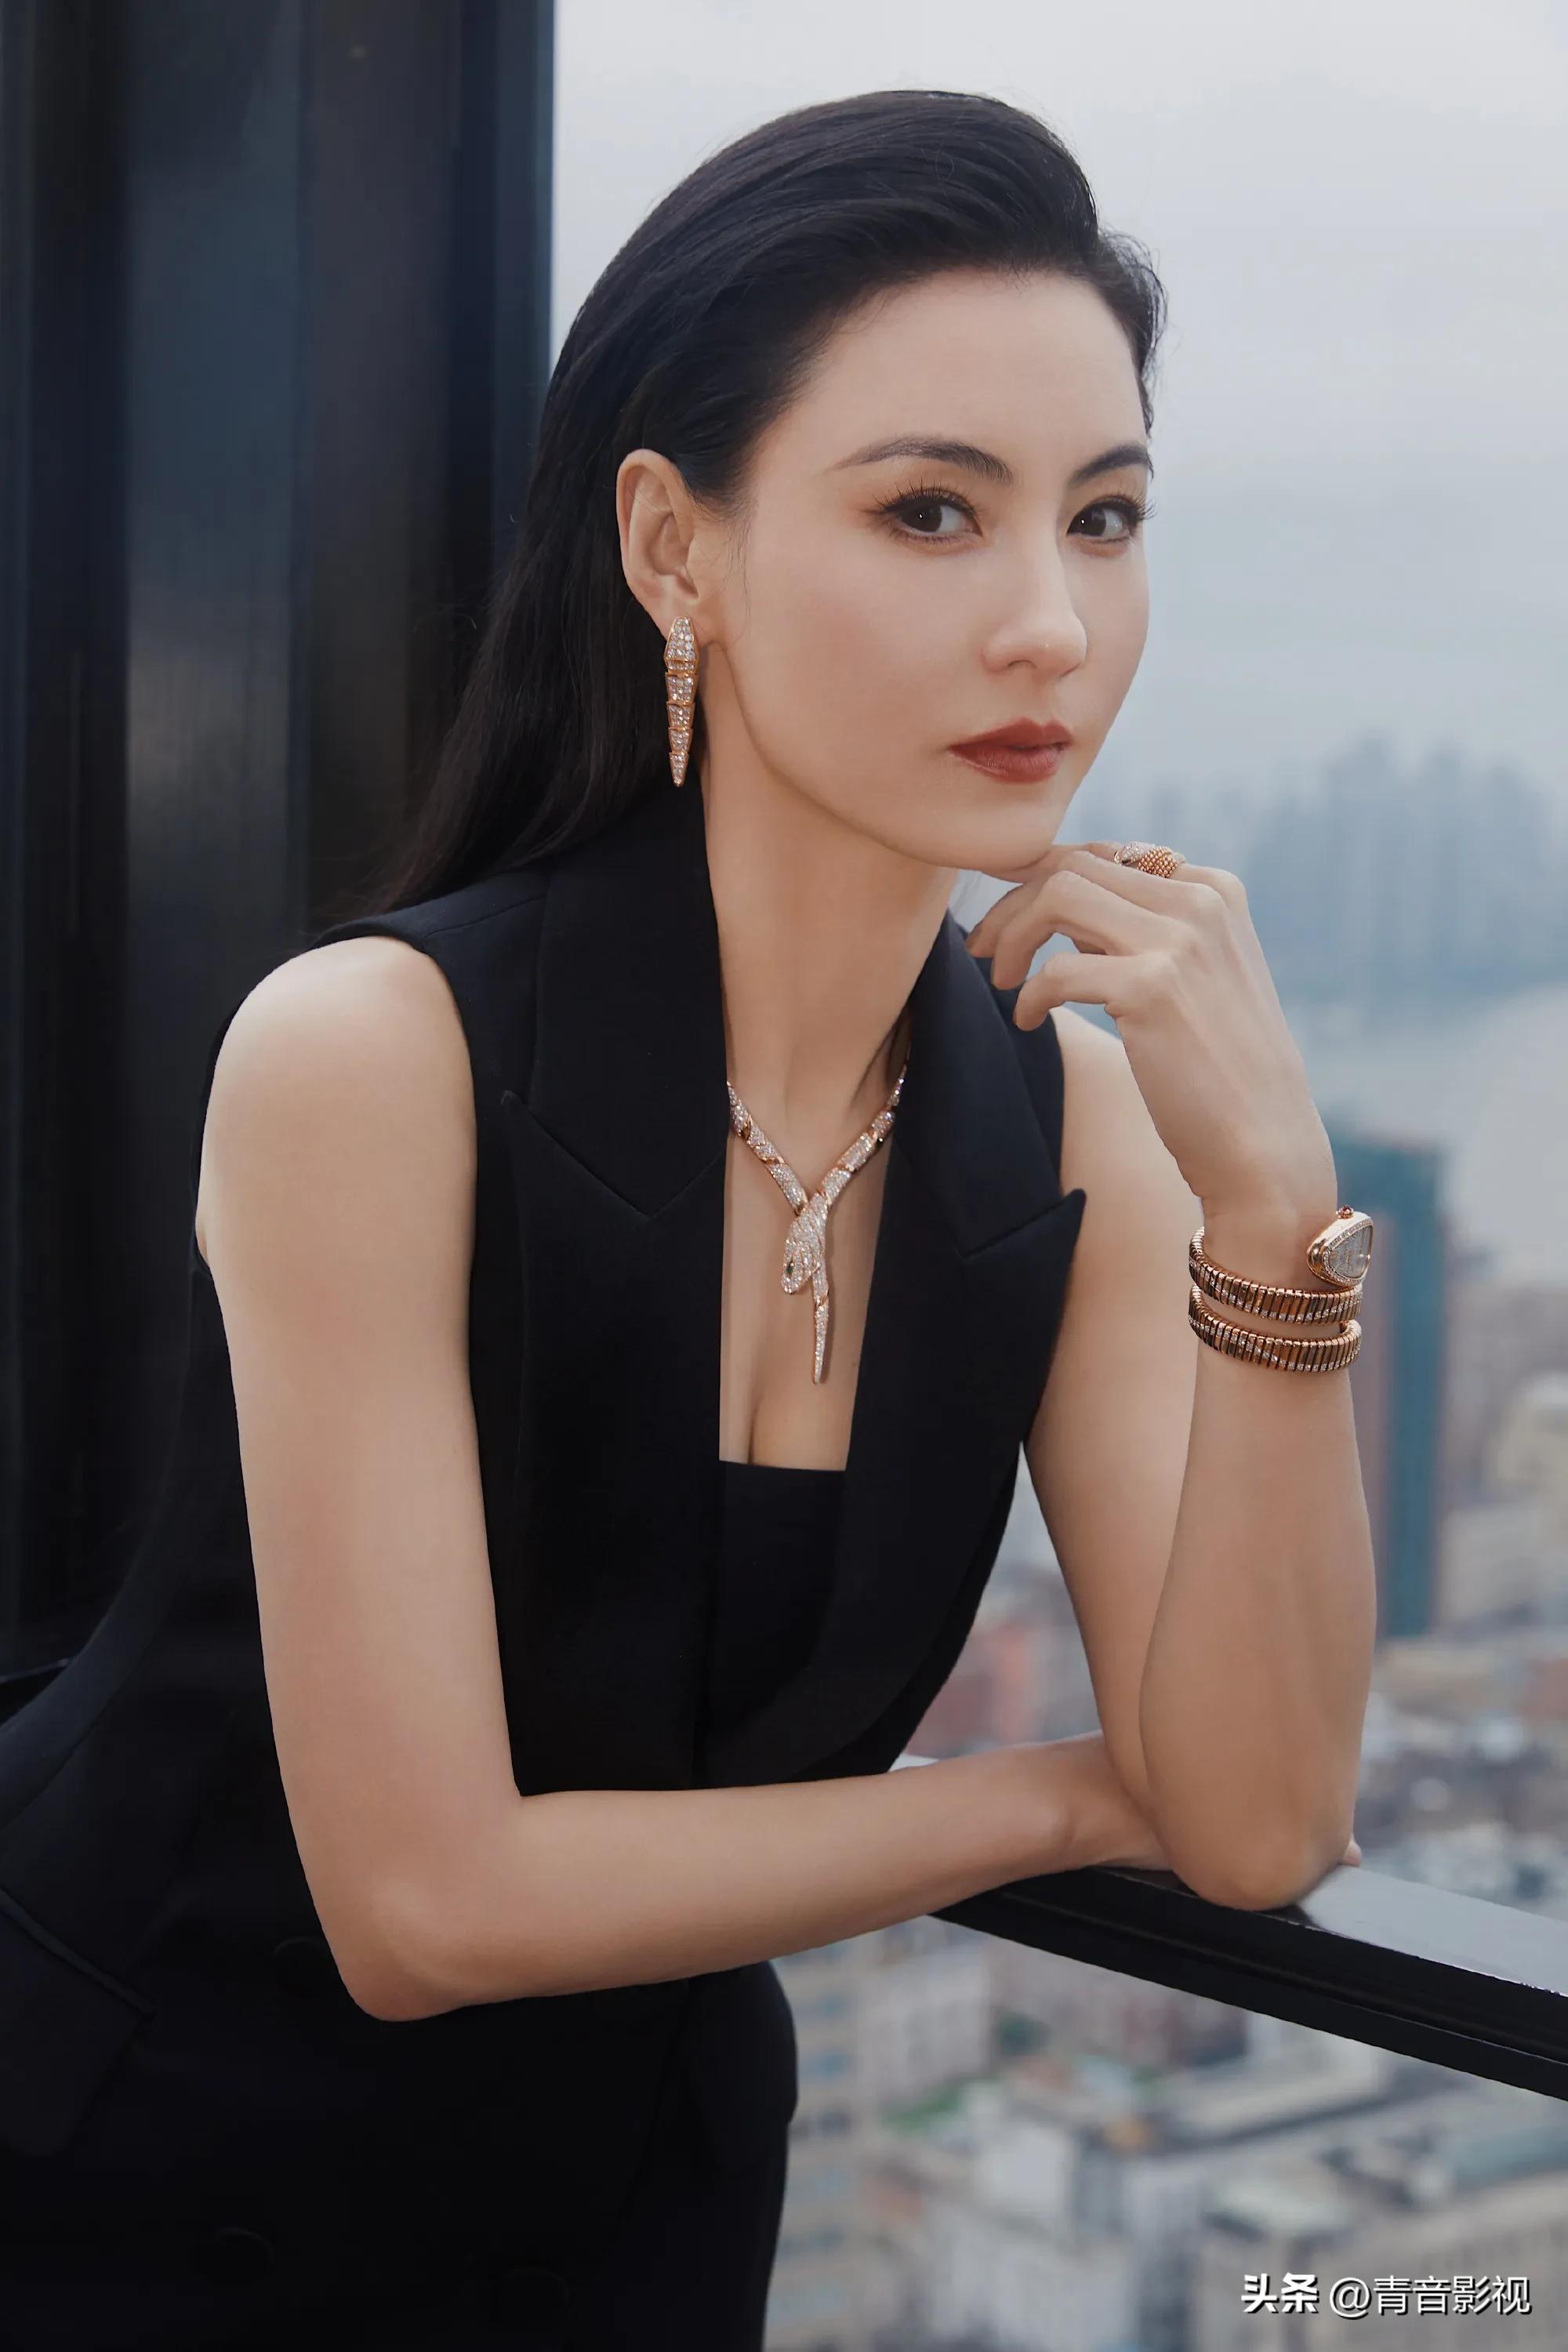 Cecilia Cheung And Zhao Lusi Are In The Same Frame The Beauty Is Not At The Same Level Inews 4544